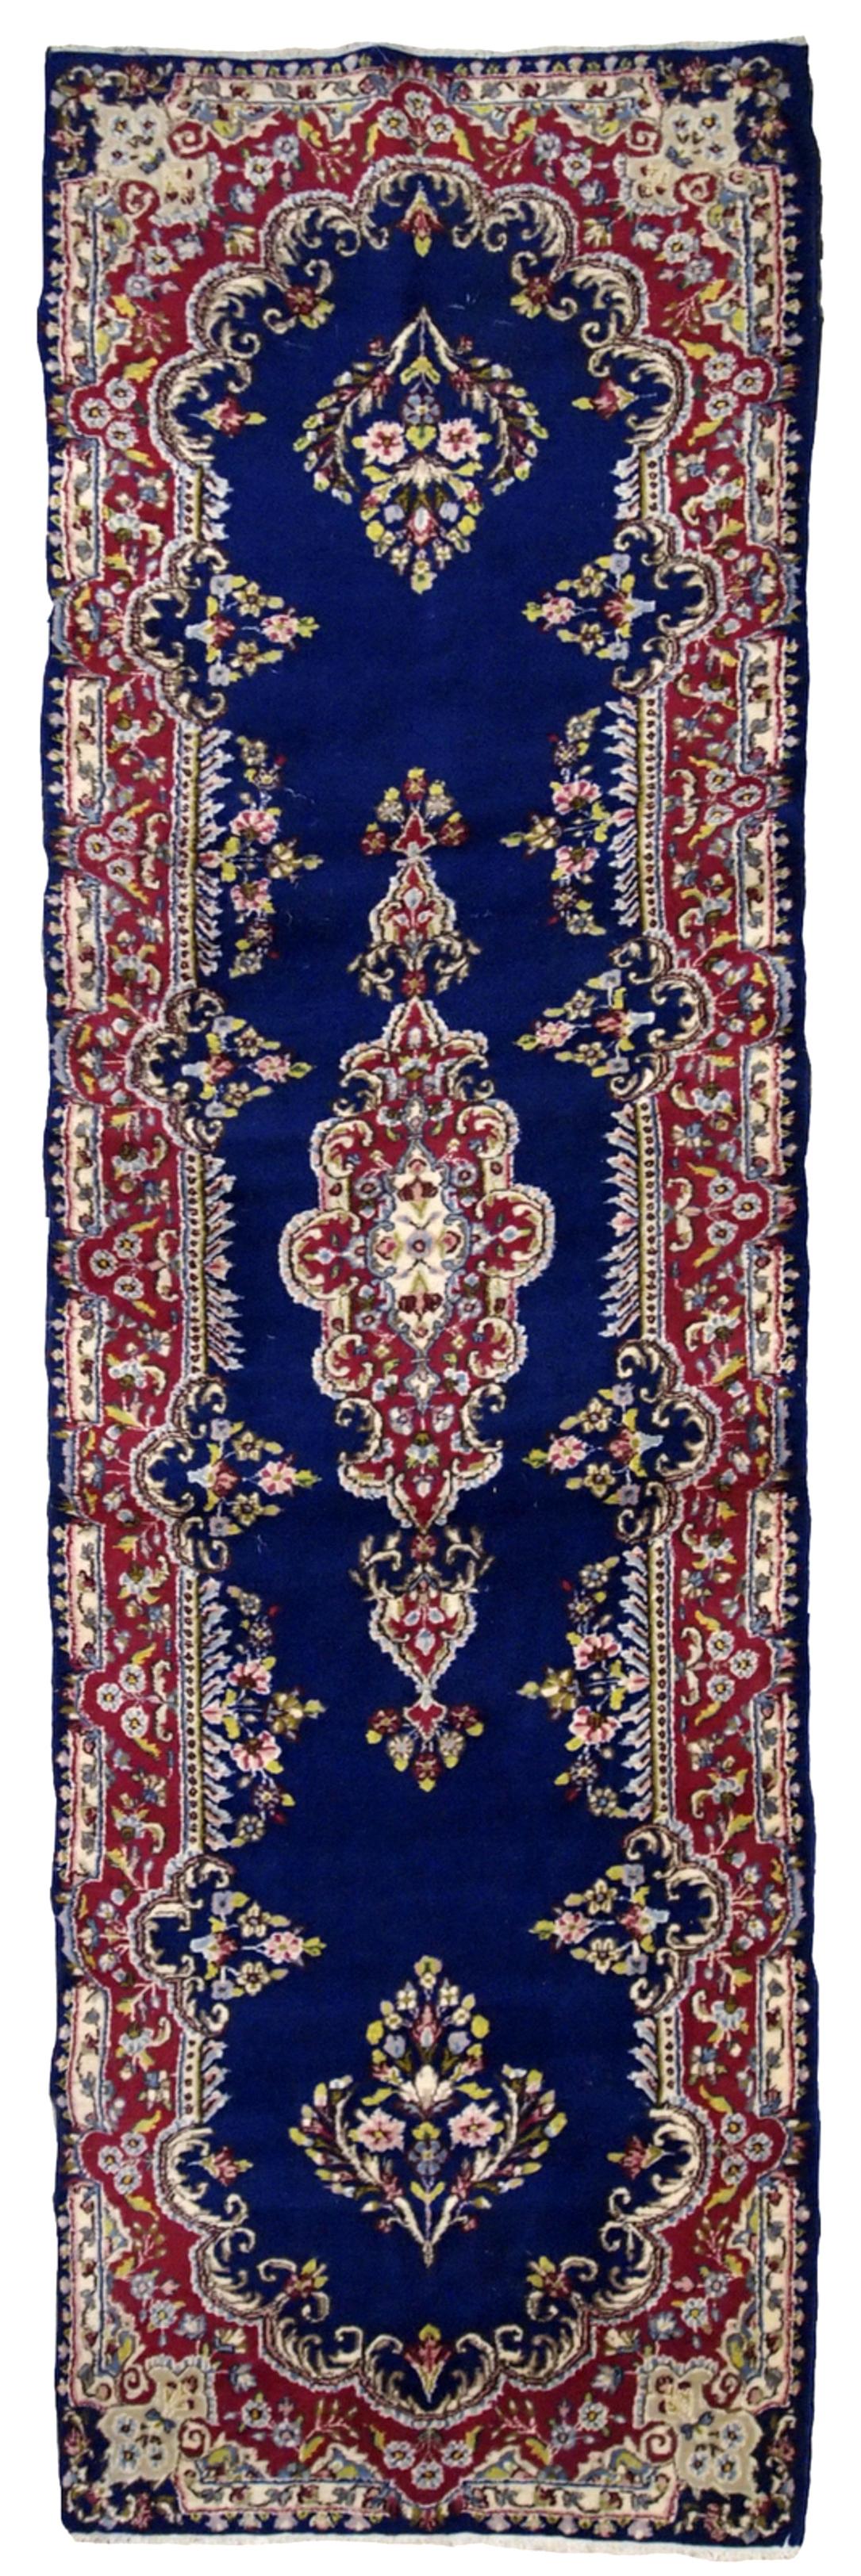 Handmade antique Persian Kerman runner in bright blue and red wool. The runner is from the middle of 20th century in original good condition.

 